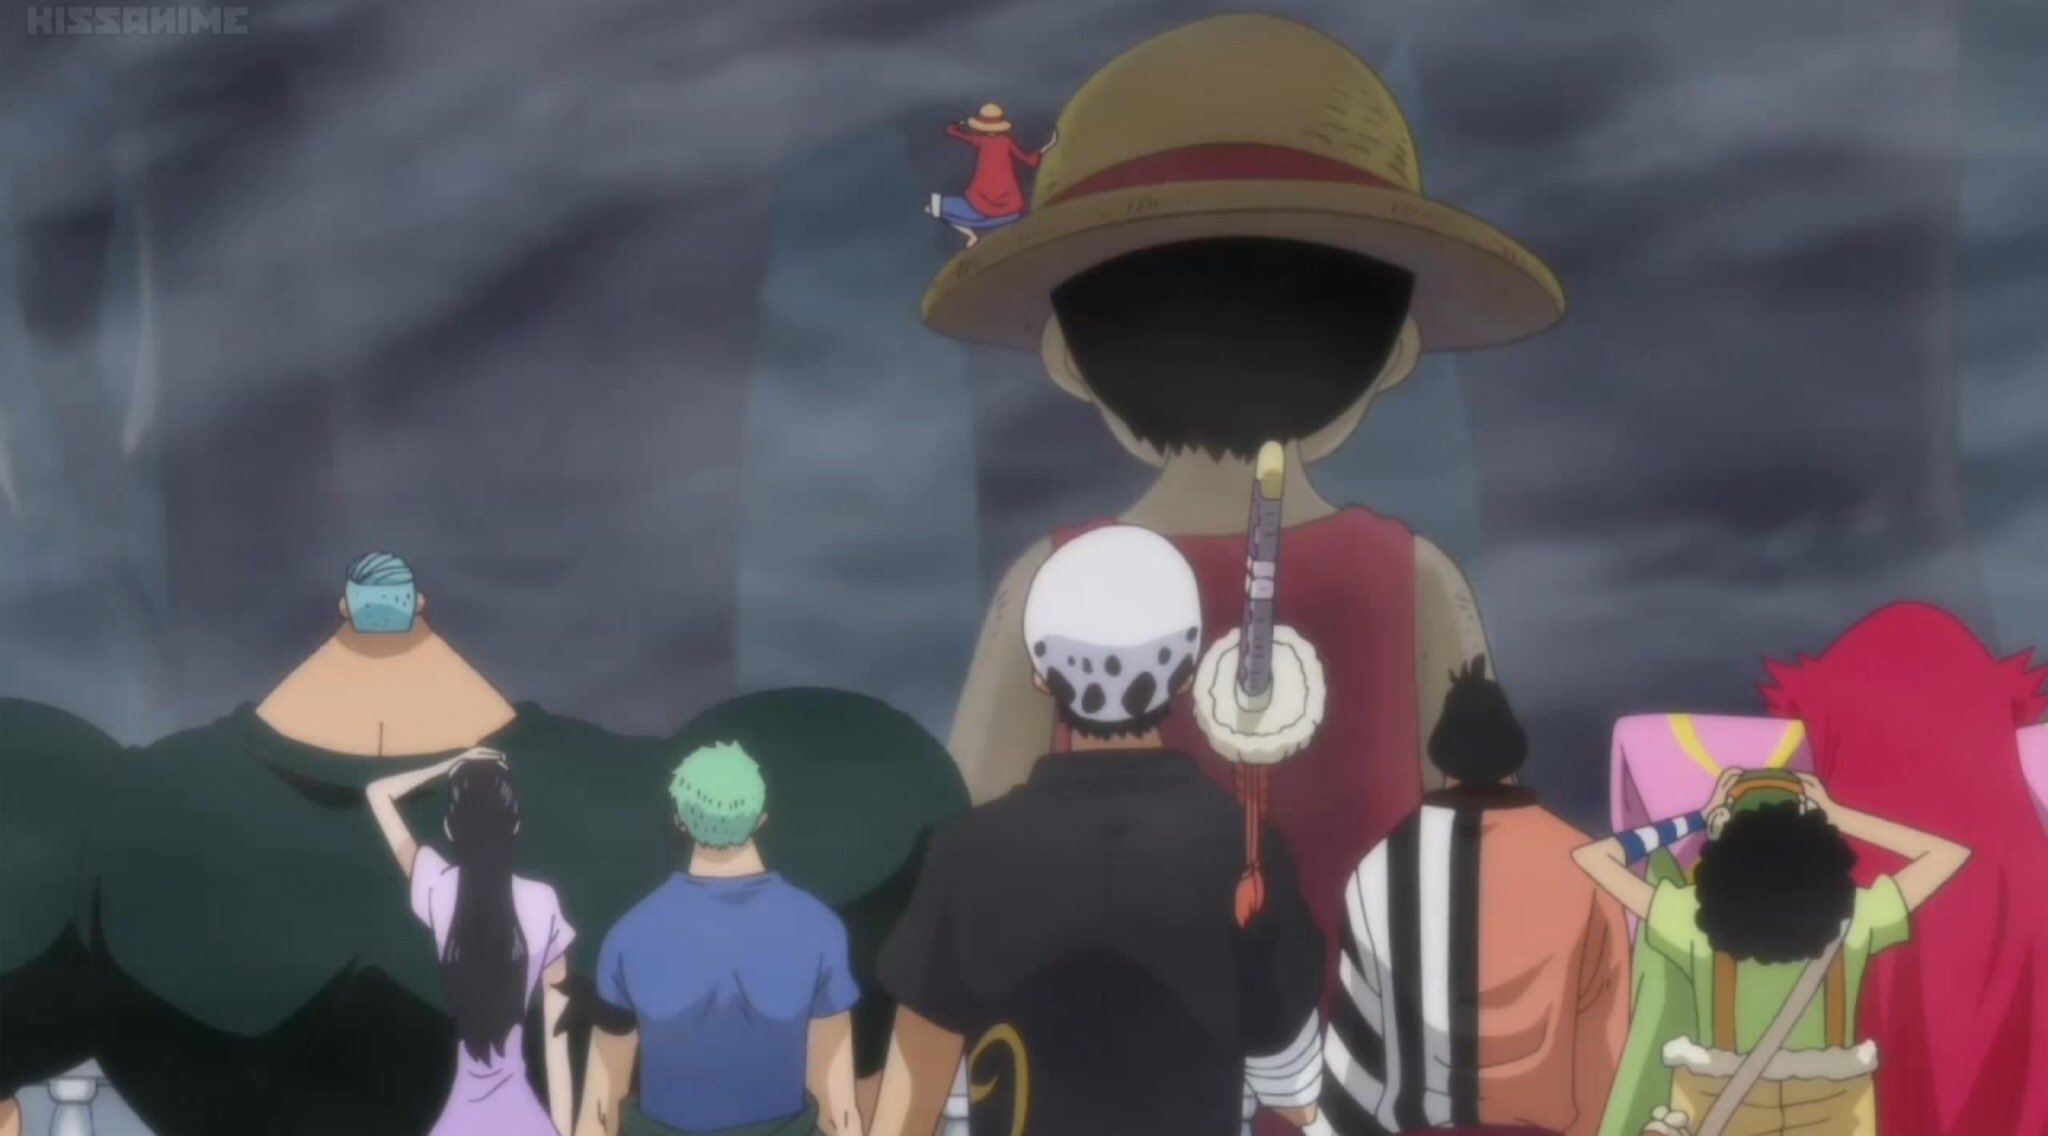 Anime Cannon Curtain Up On A New Adventure Arriving At The Phantom Island Zou One Piece Episode 751 Anime Onepiece Luffy T Co Ibgy7ujklo Twitter